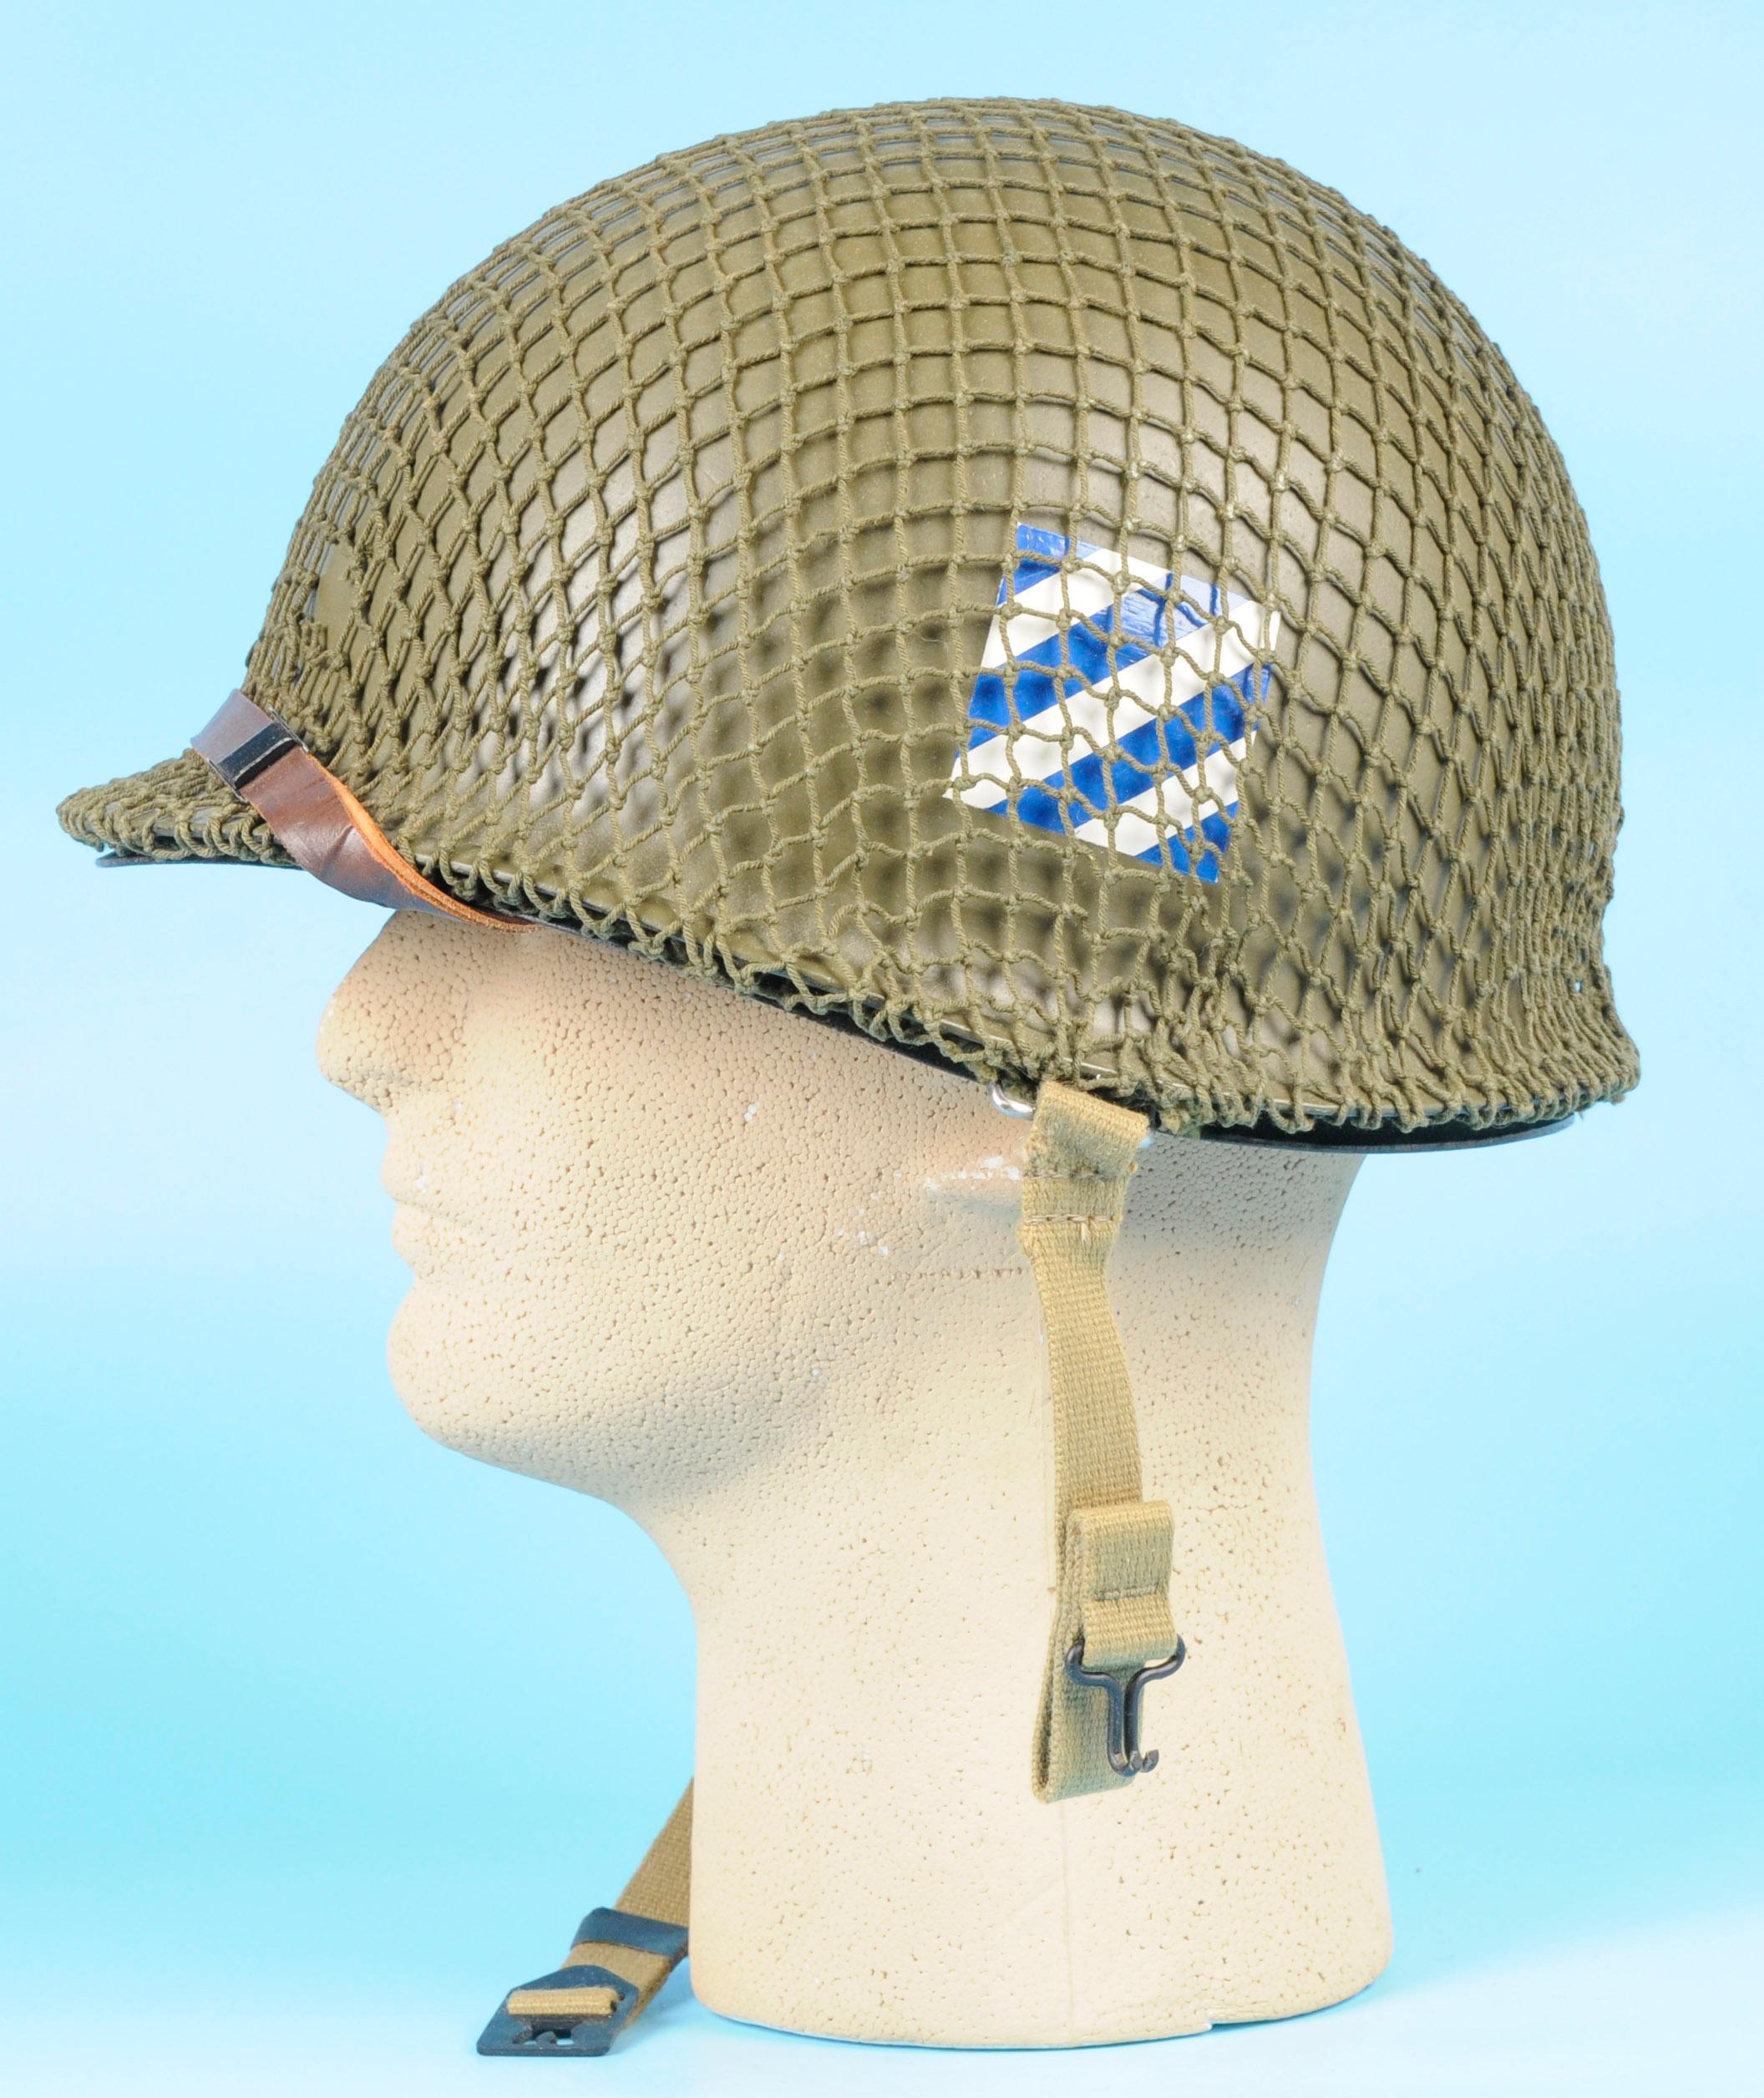 US Army WWII 3rd Division M1 Helmet, Liner, Chinstraps and Camo Netting (SJZ)